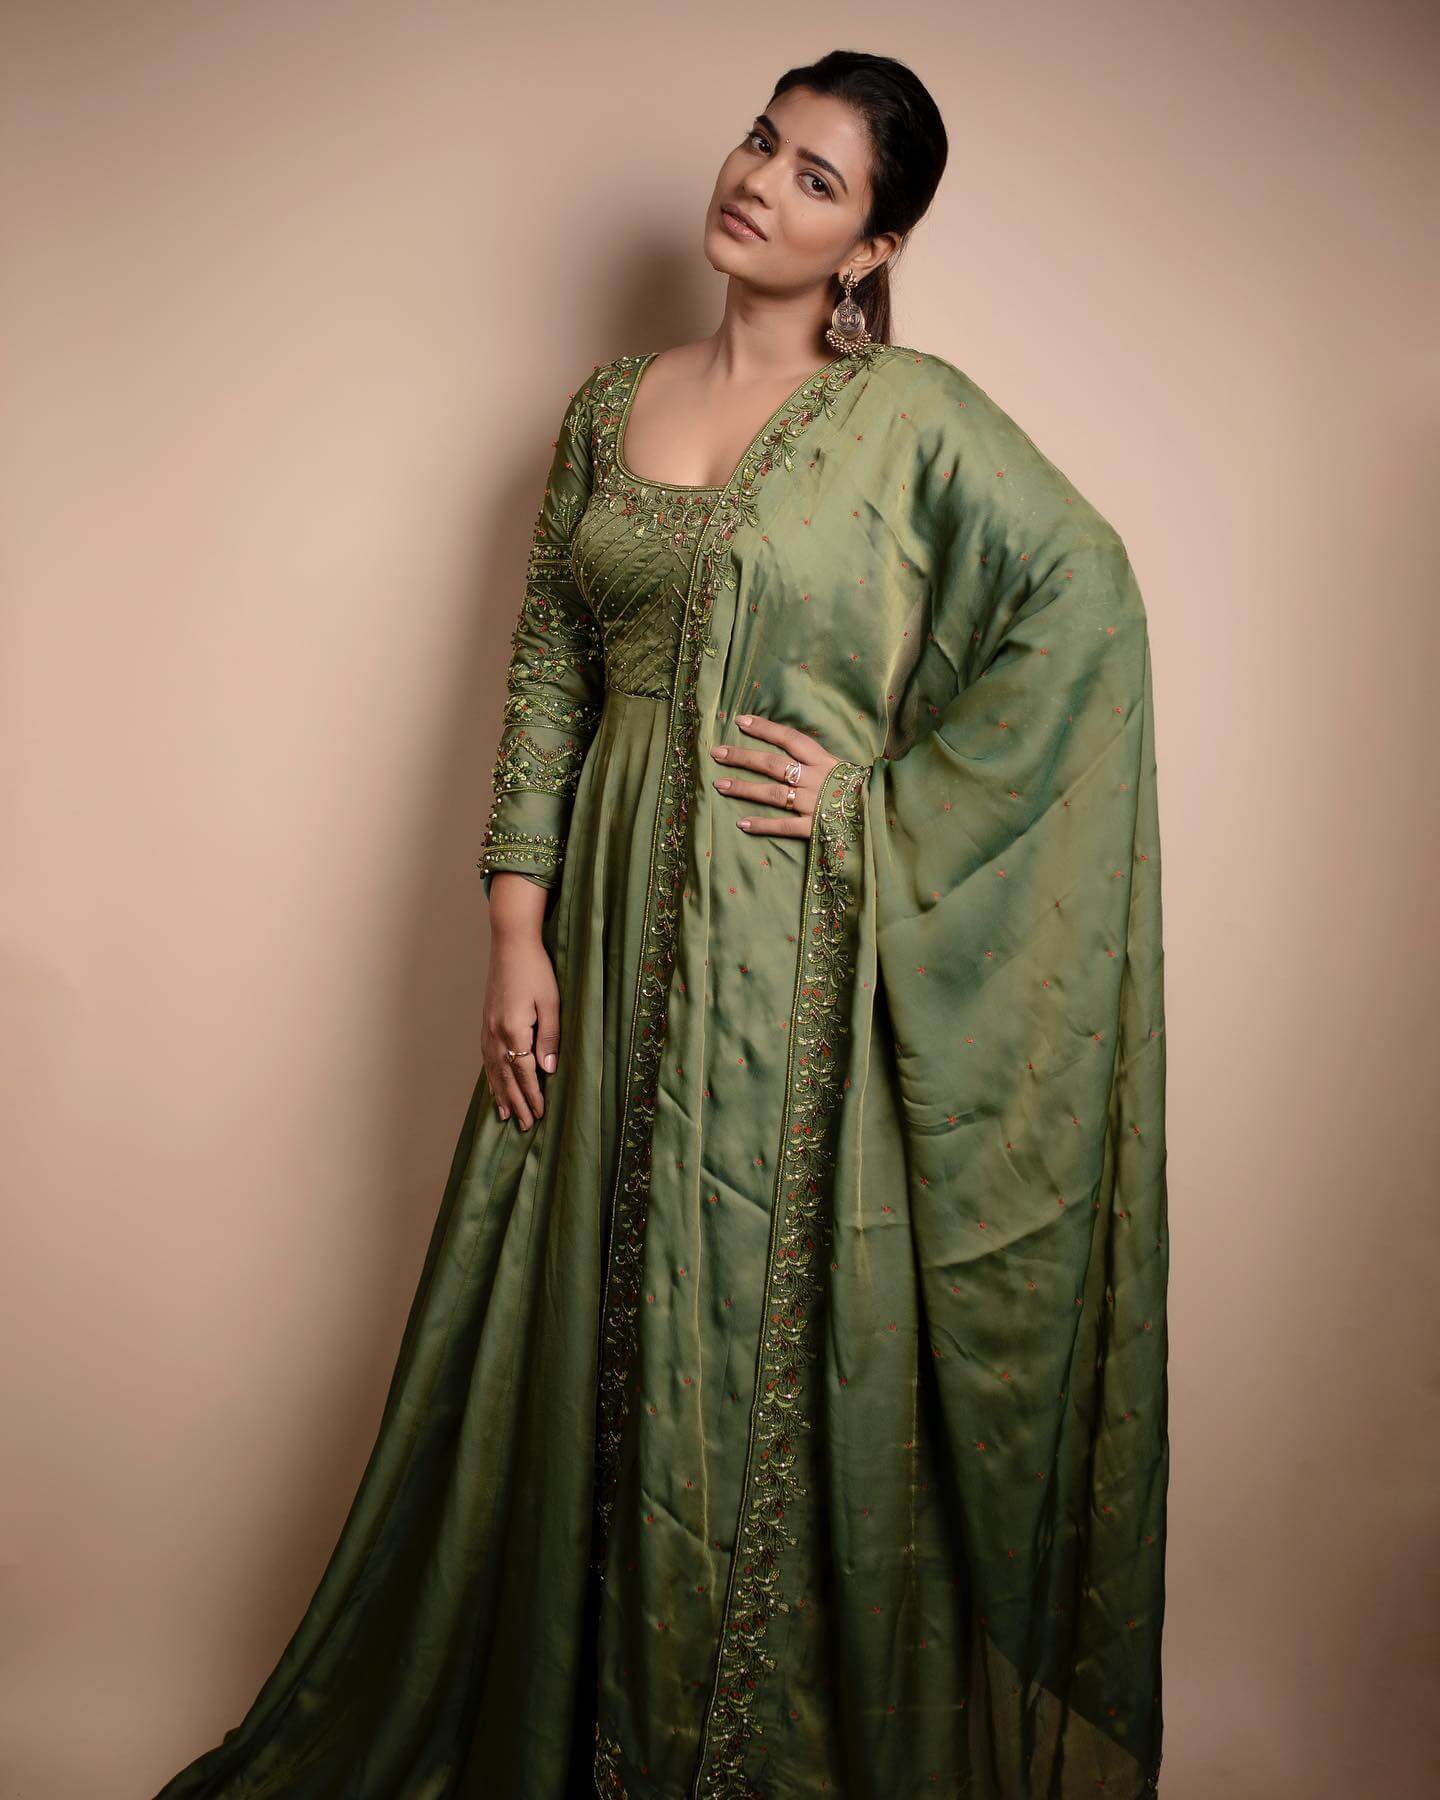 Aishwarya Rajesh In Olive Satin Gown Paired With Solid Olive Dupatta